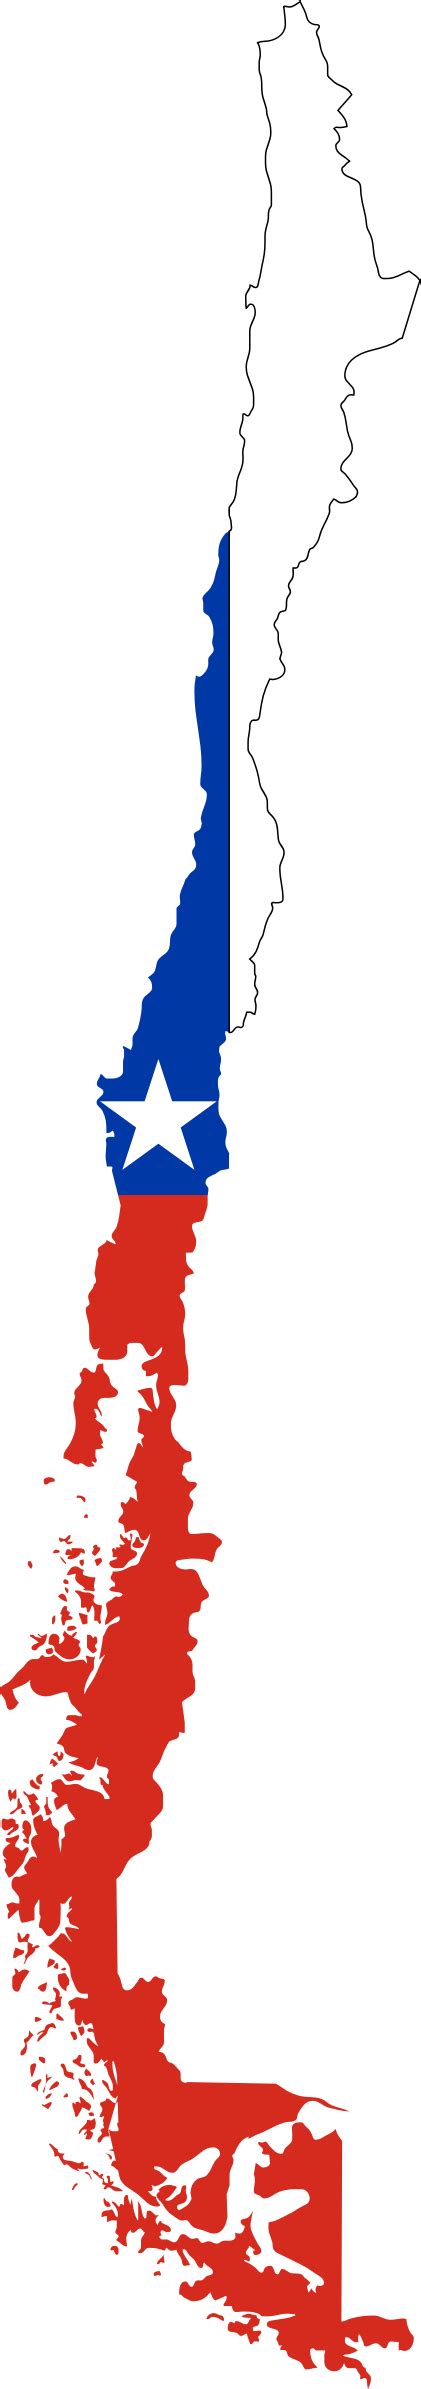 chile map png